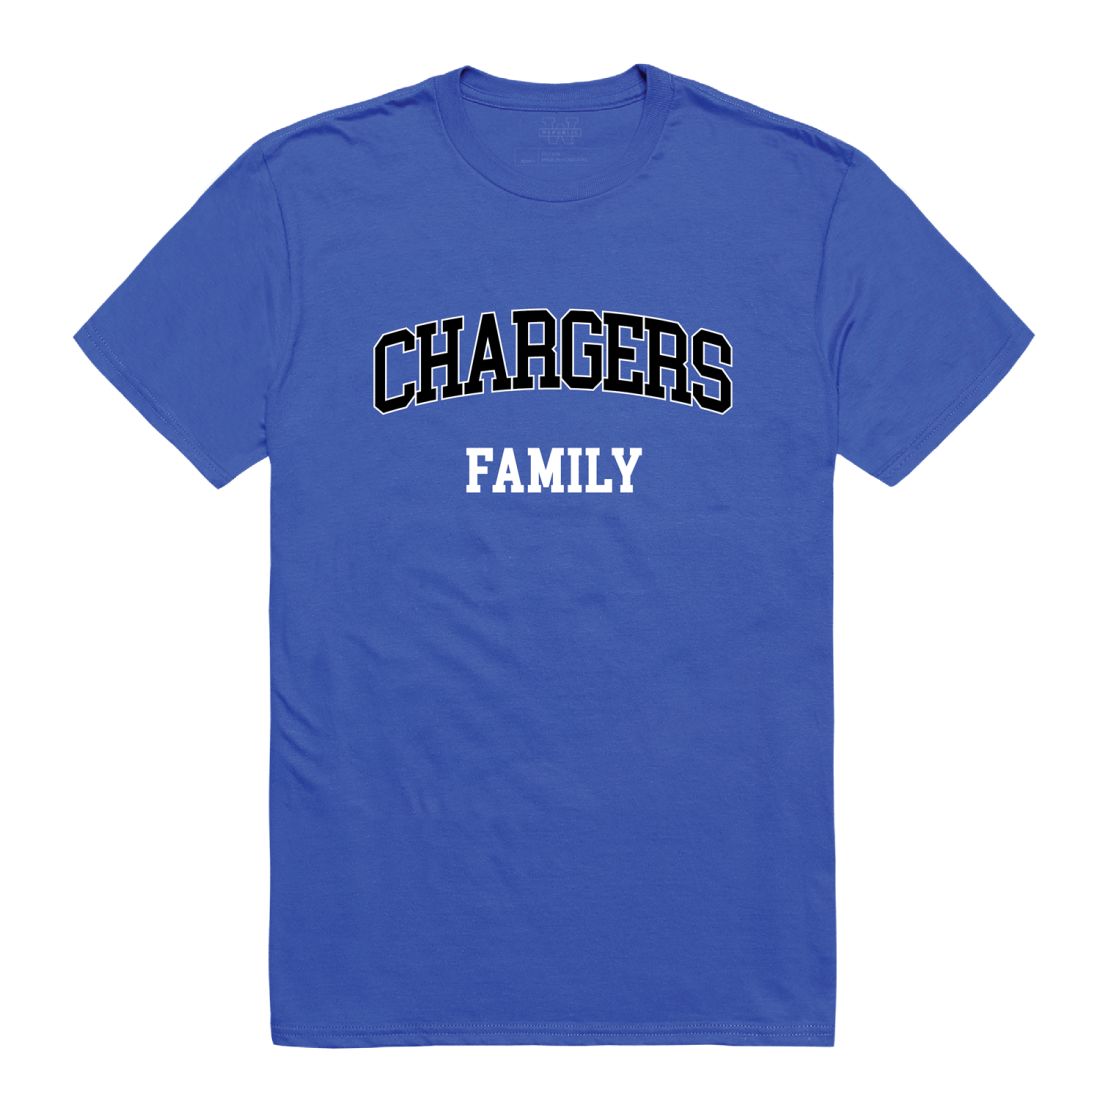 The University of Alabama in Huntsville Chargers Family T-Shirt